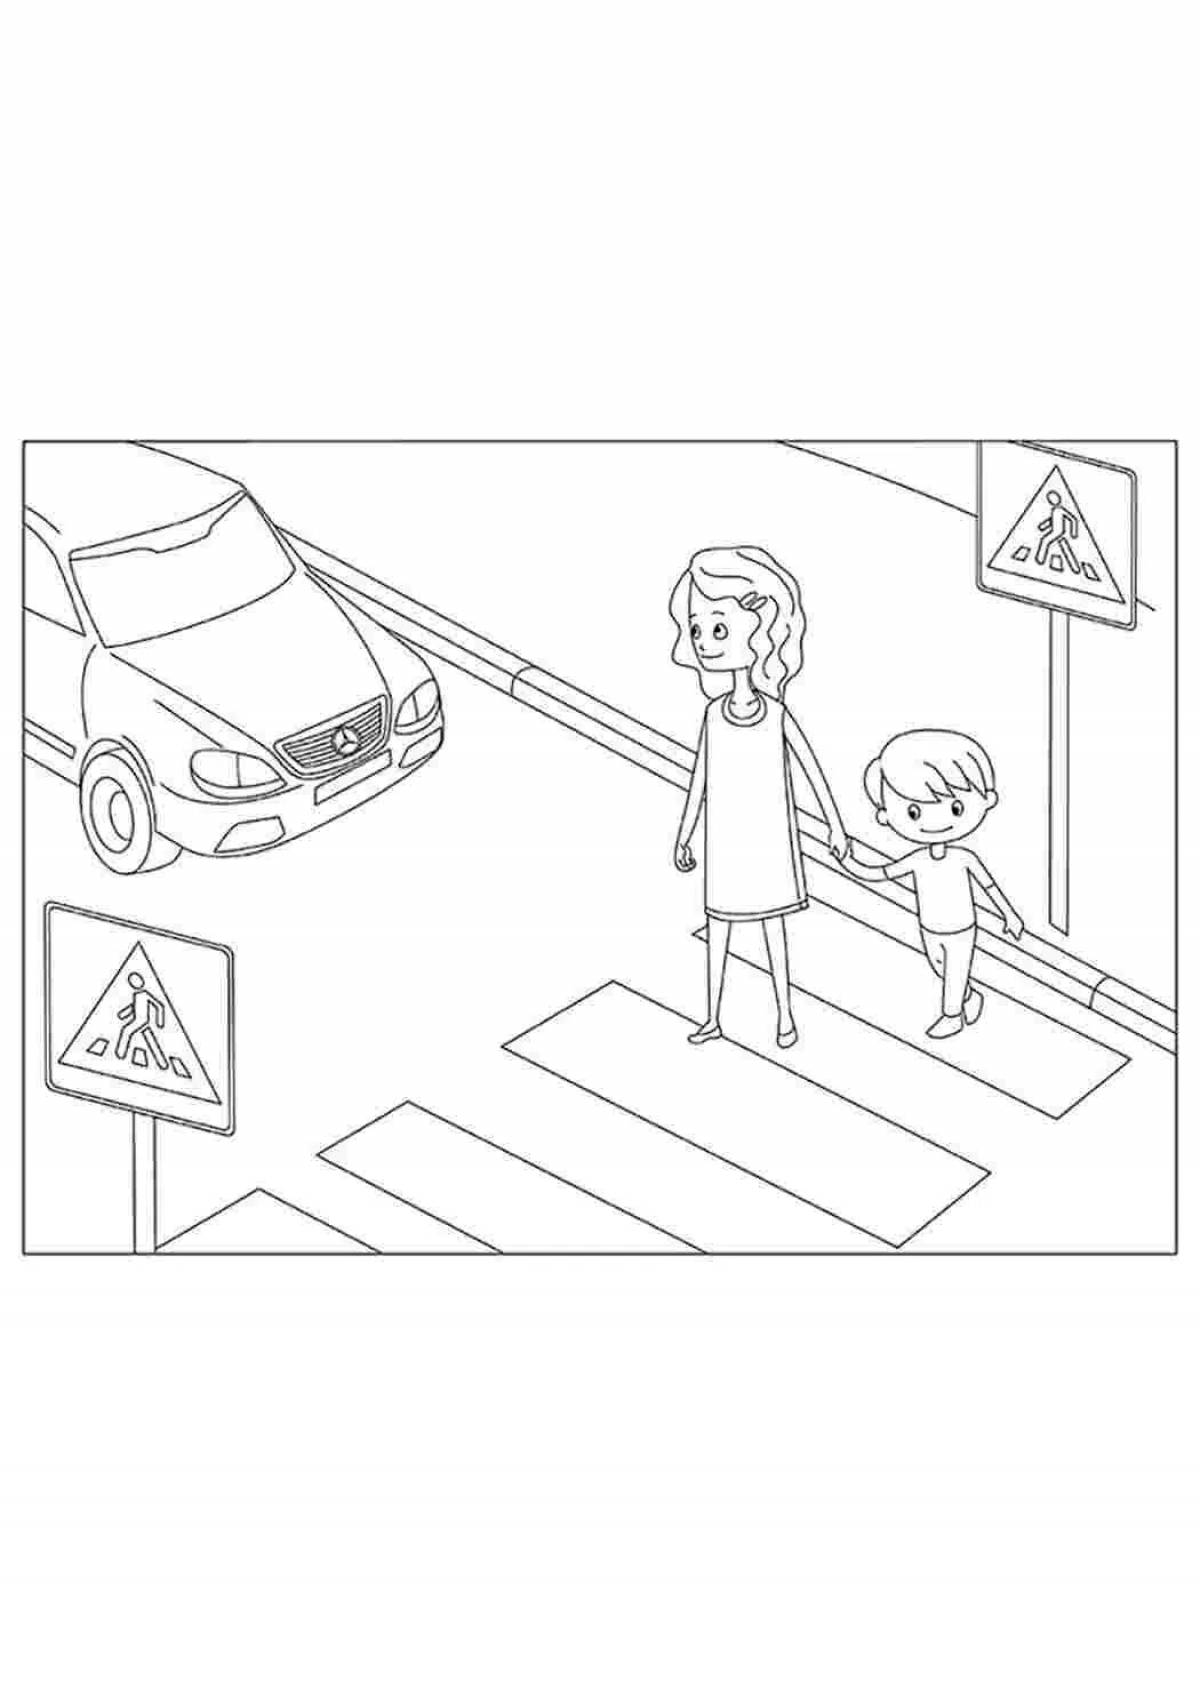 Coloring book stimulating rules of the road for 1st grade